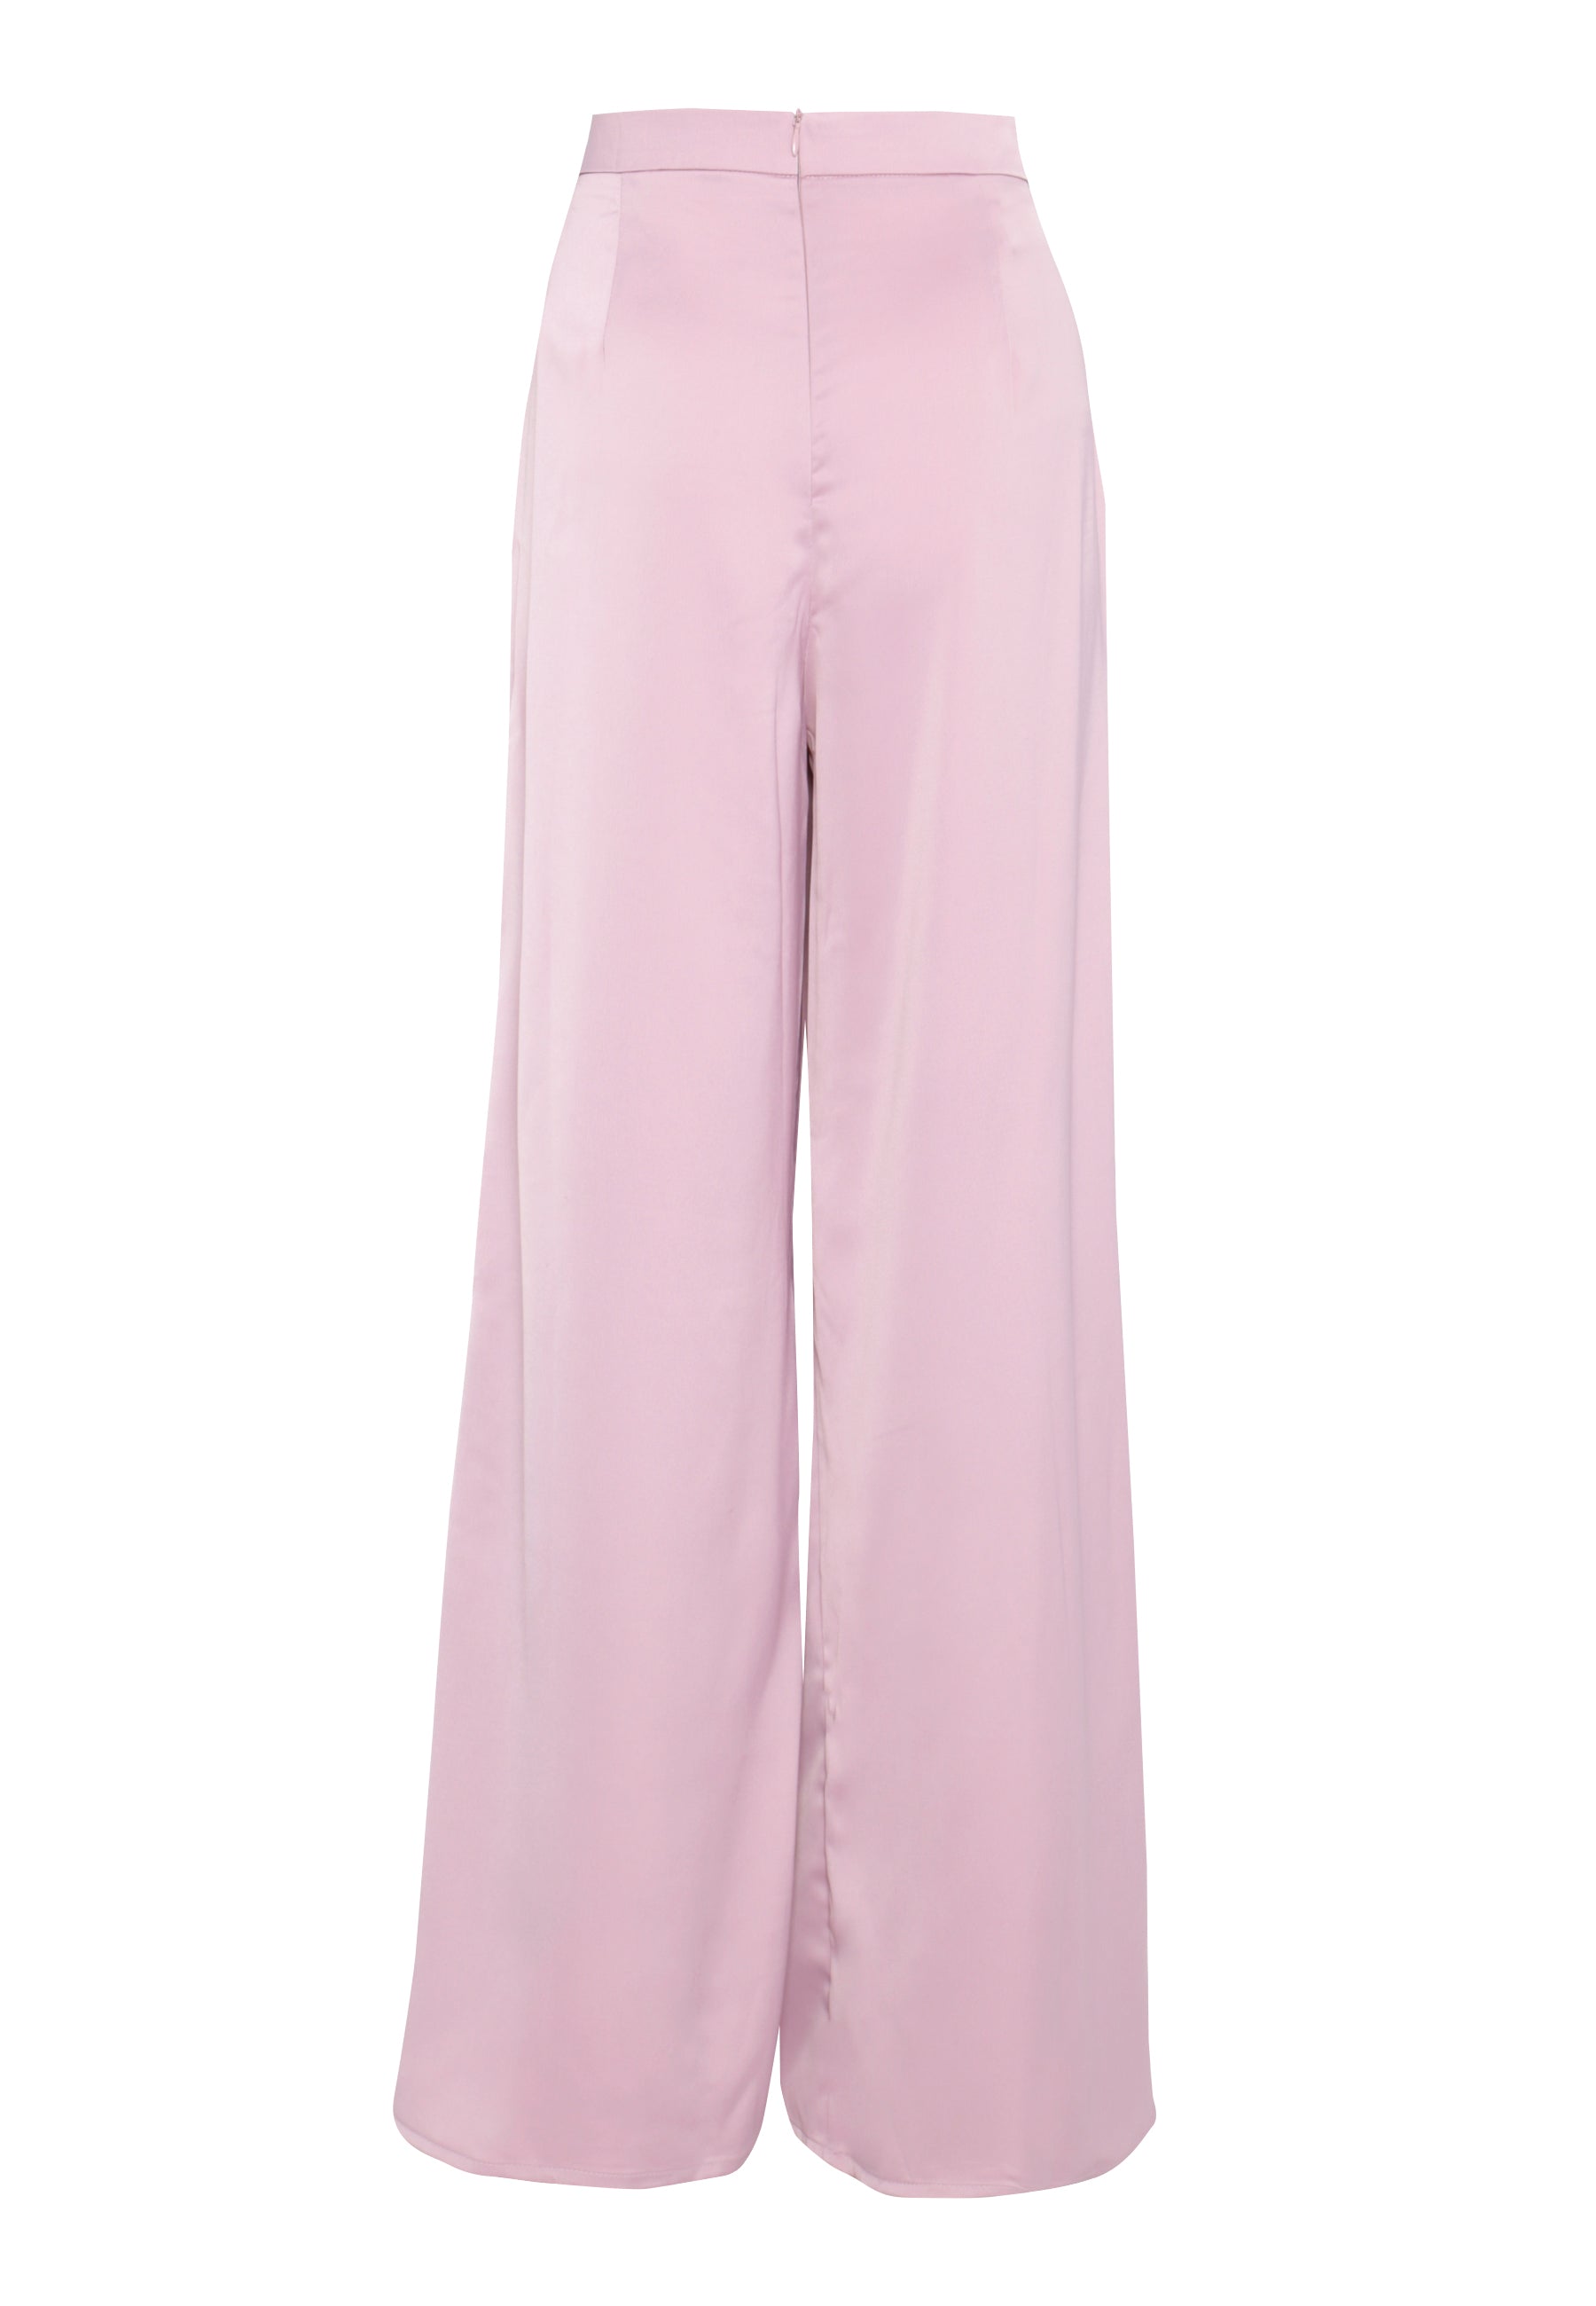 Glamorous Dusted Pink Satin Wide Leg Trousers